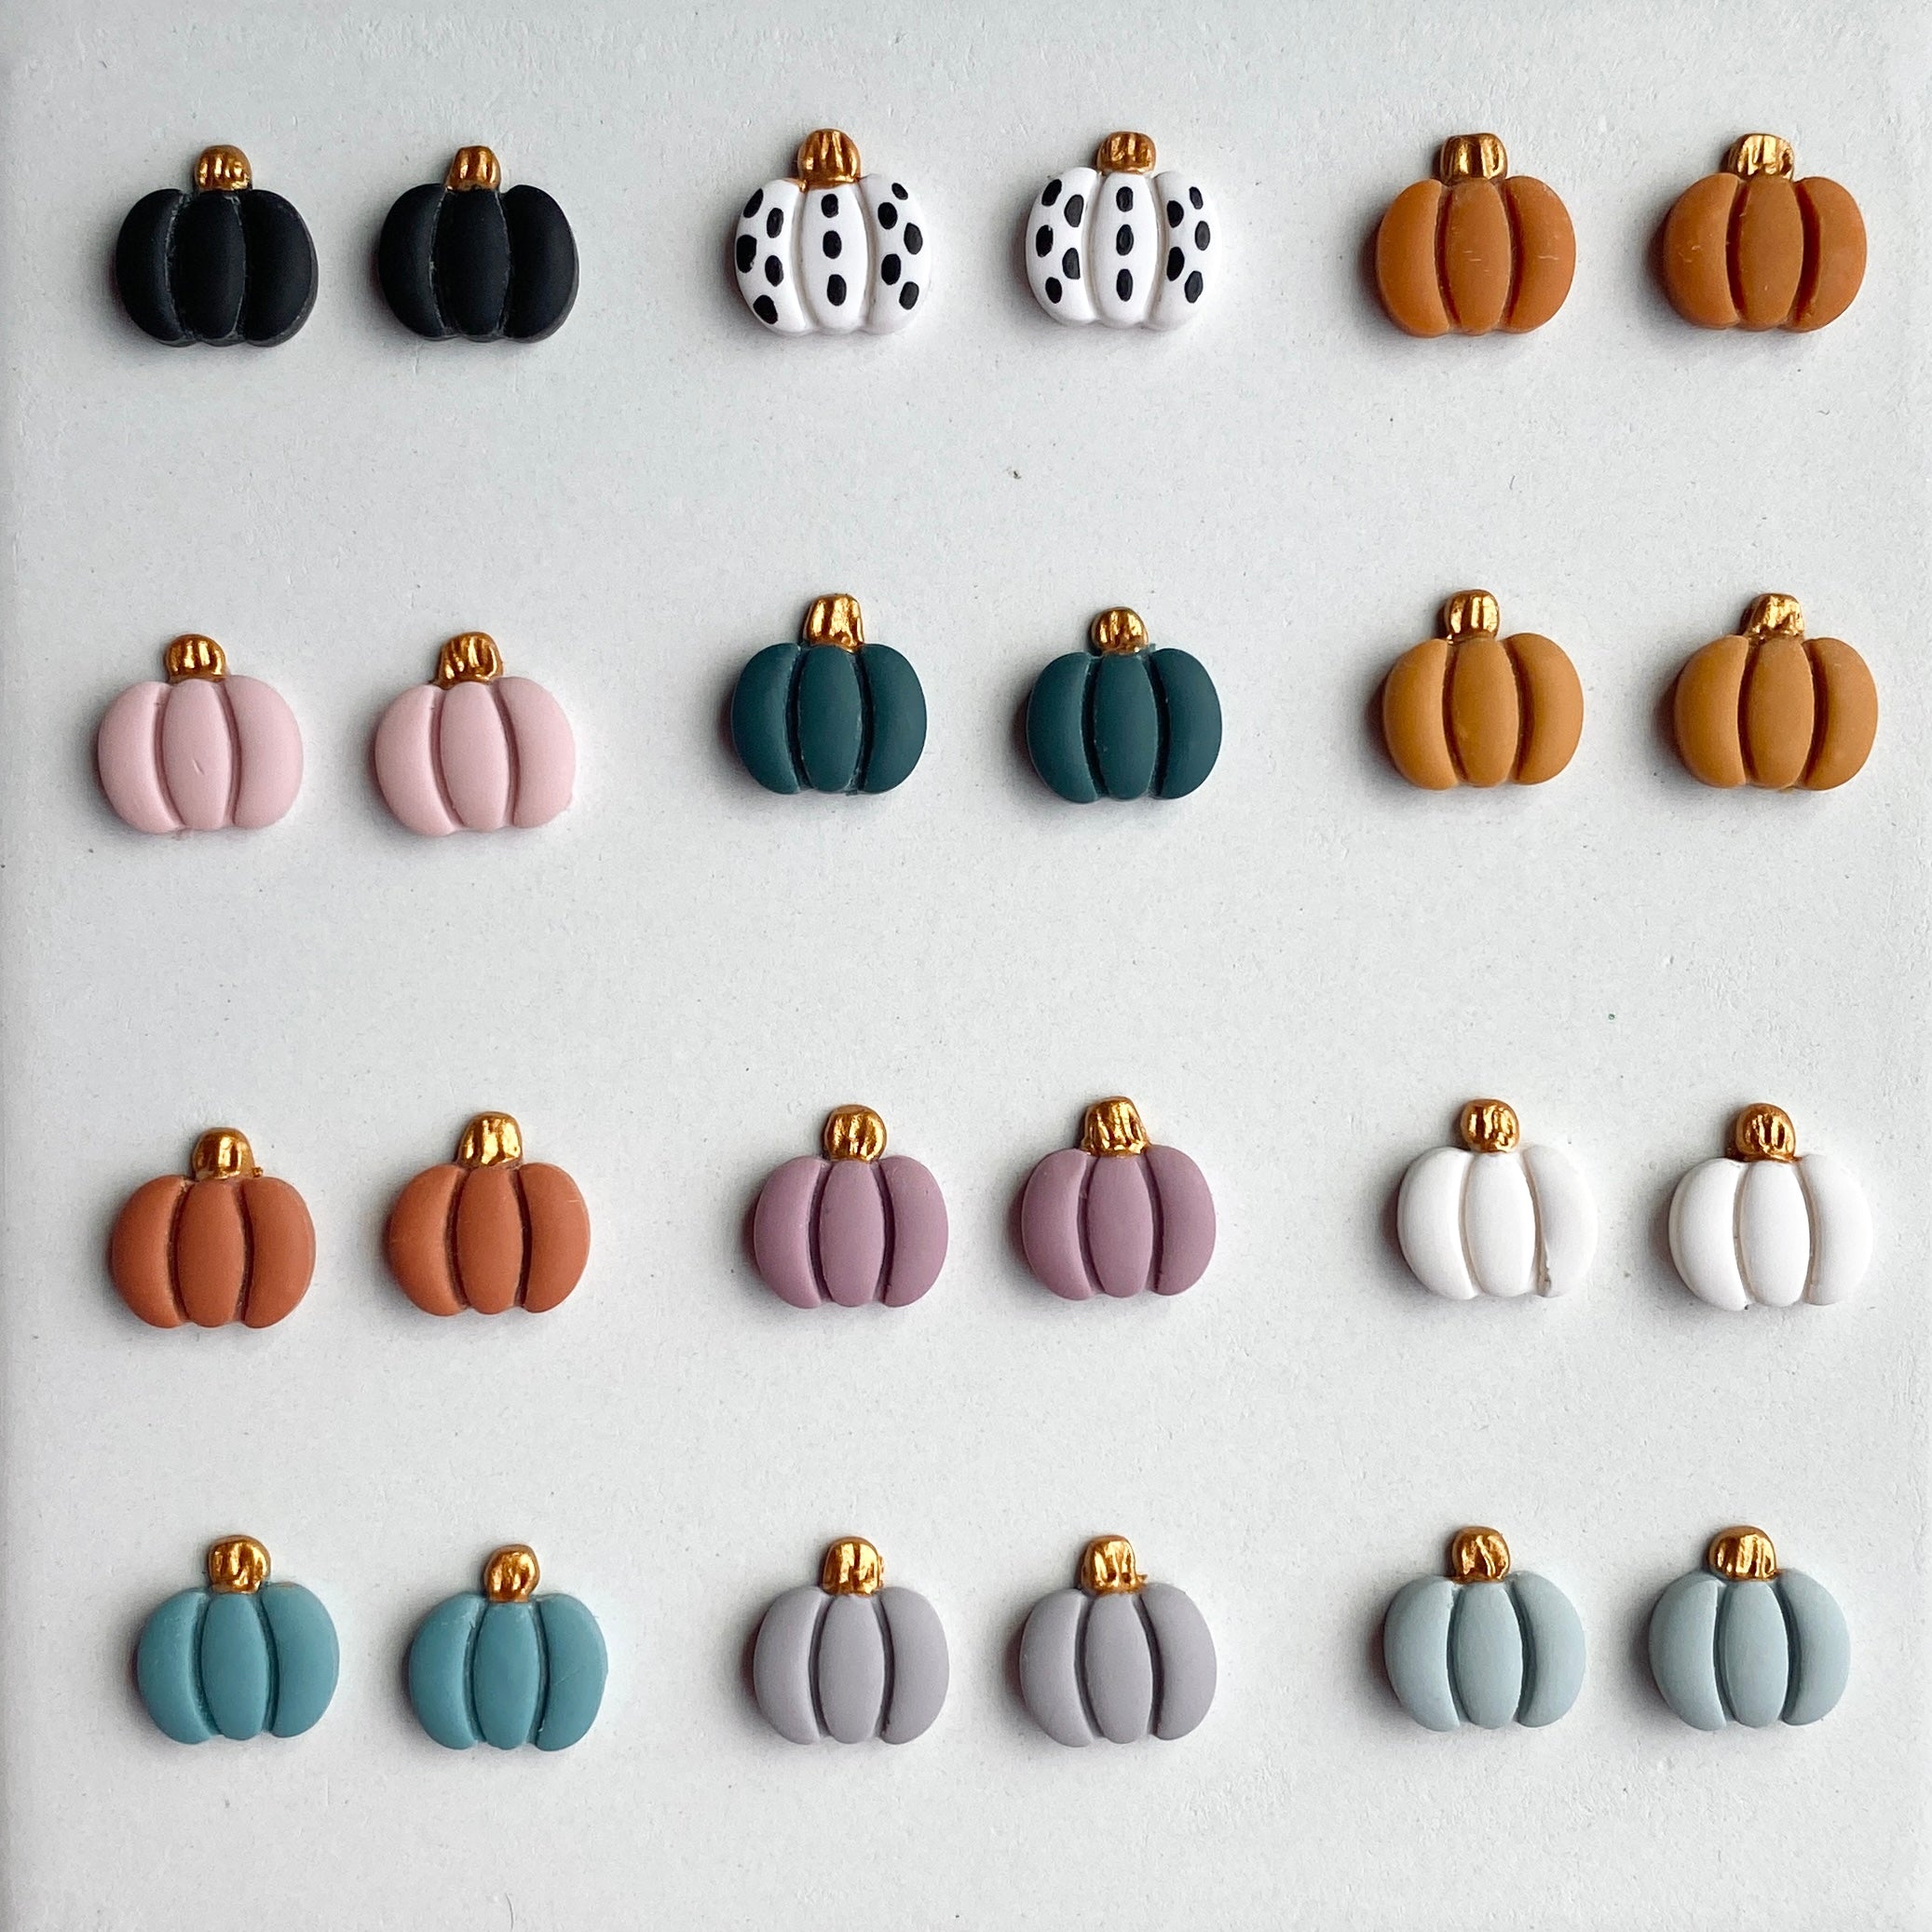 Build Your Own Polymer Clay Earrings Kit Including Charms and